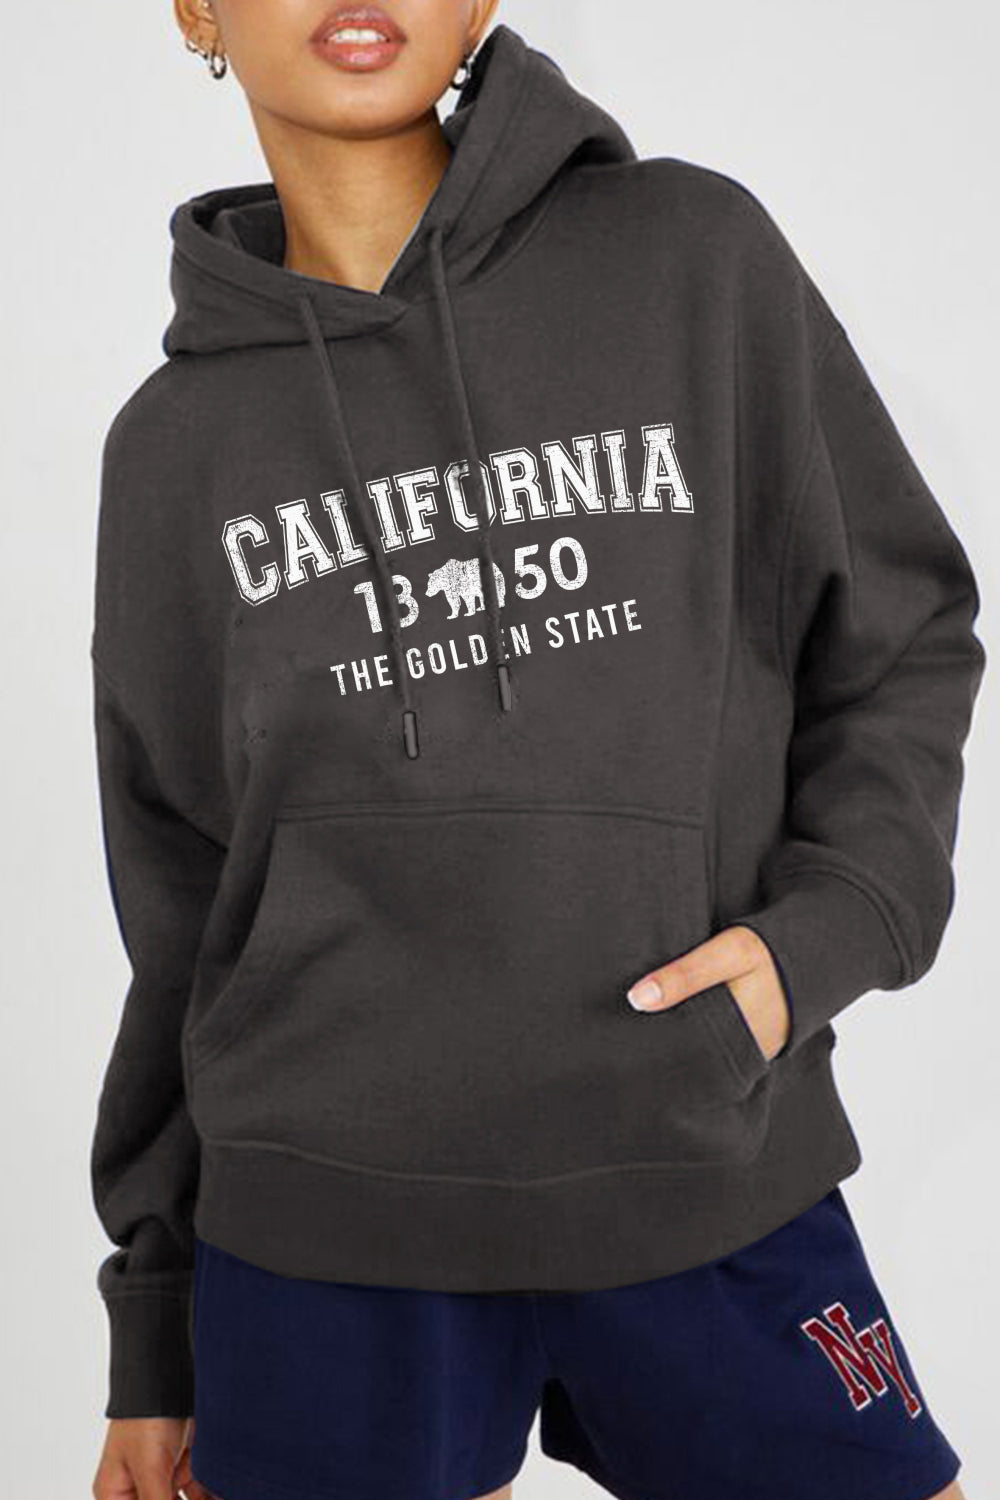 Simply Love Simply Love Full Size CALIFORNIA 1850 THE GOLDEN STATE Graphic Hoodie - Kawaii Stop - Kawaii Shop